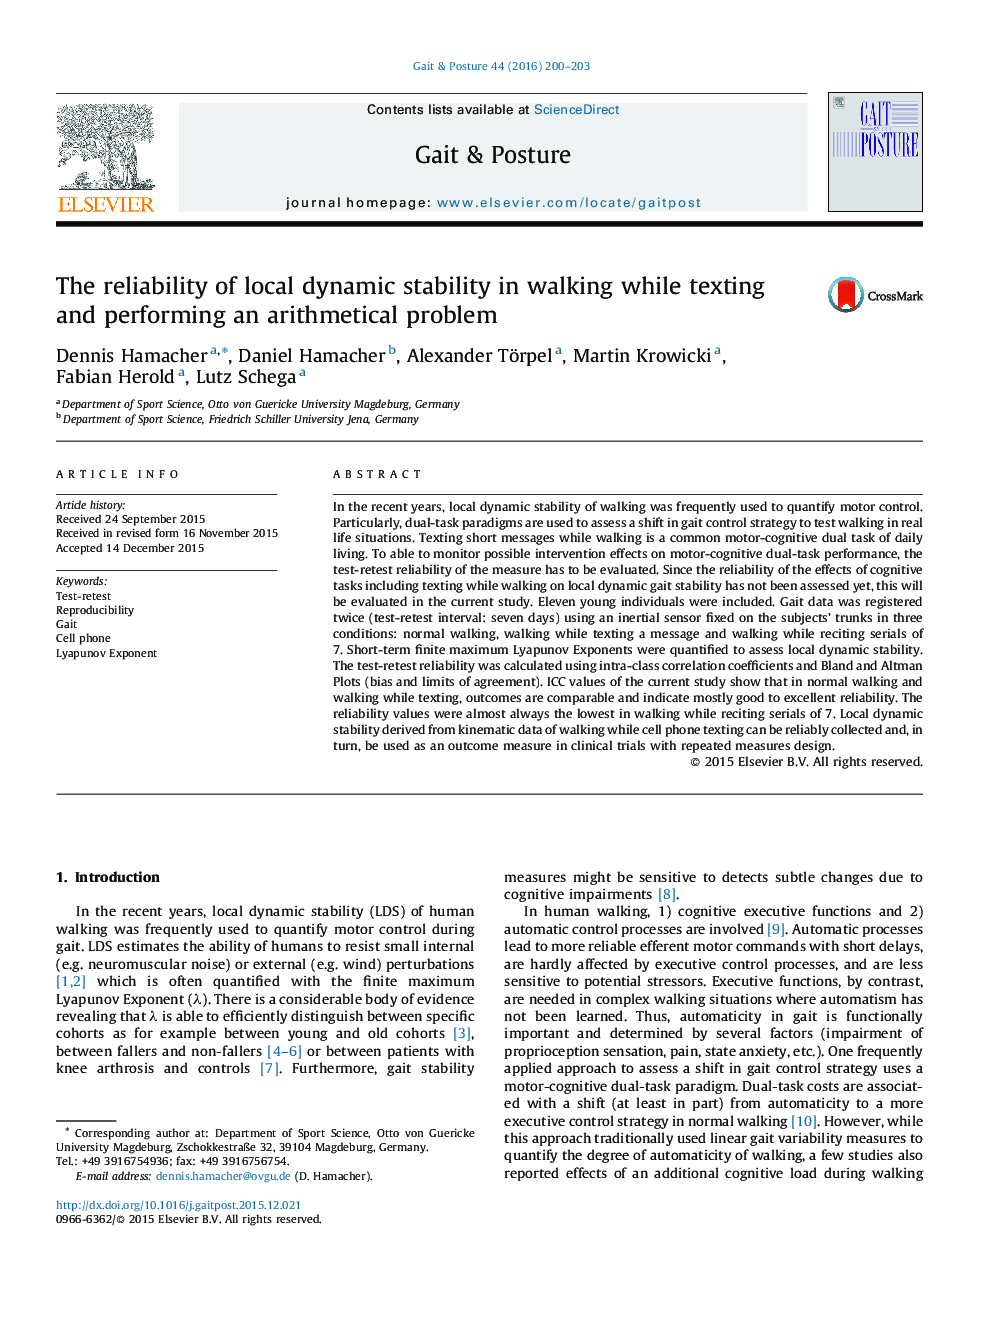 The reliability of local dynamic stability in walking while texting and performing an arithmetical problem